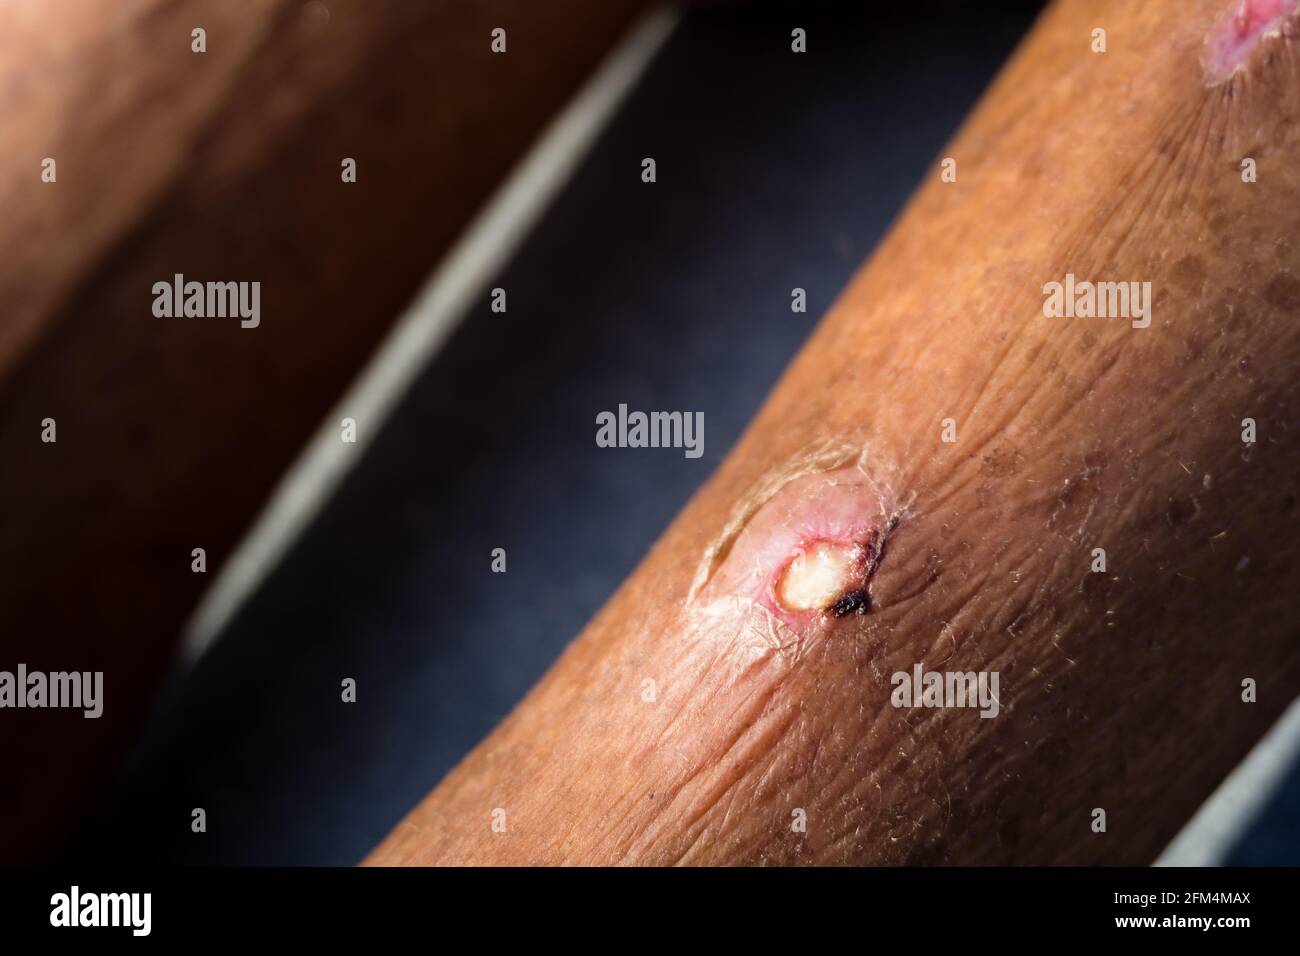 A close up shot of an infected boil filled with pus inside on the leg of a patient. A painful, pus-filled bump under the skin caused by infected, infl Stock Photo